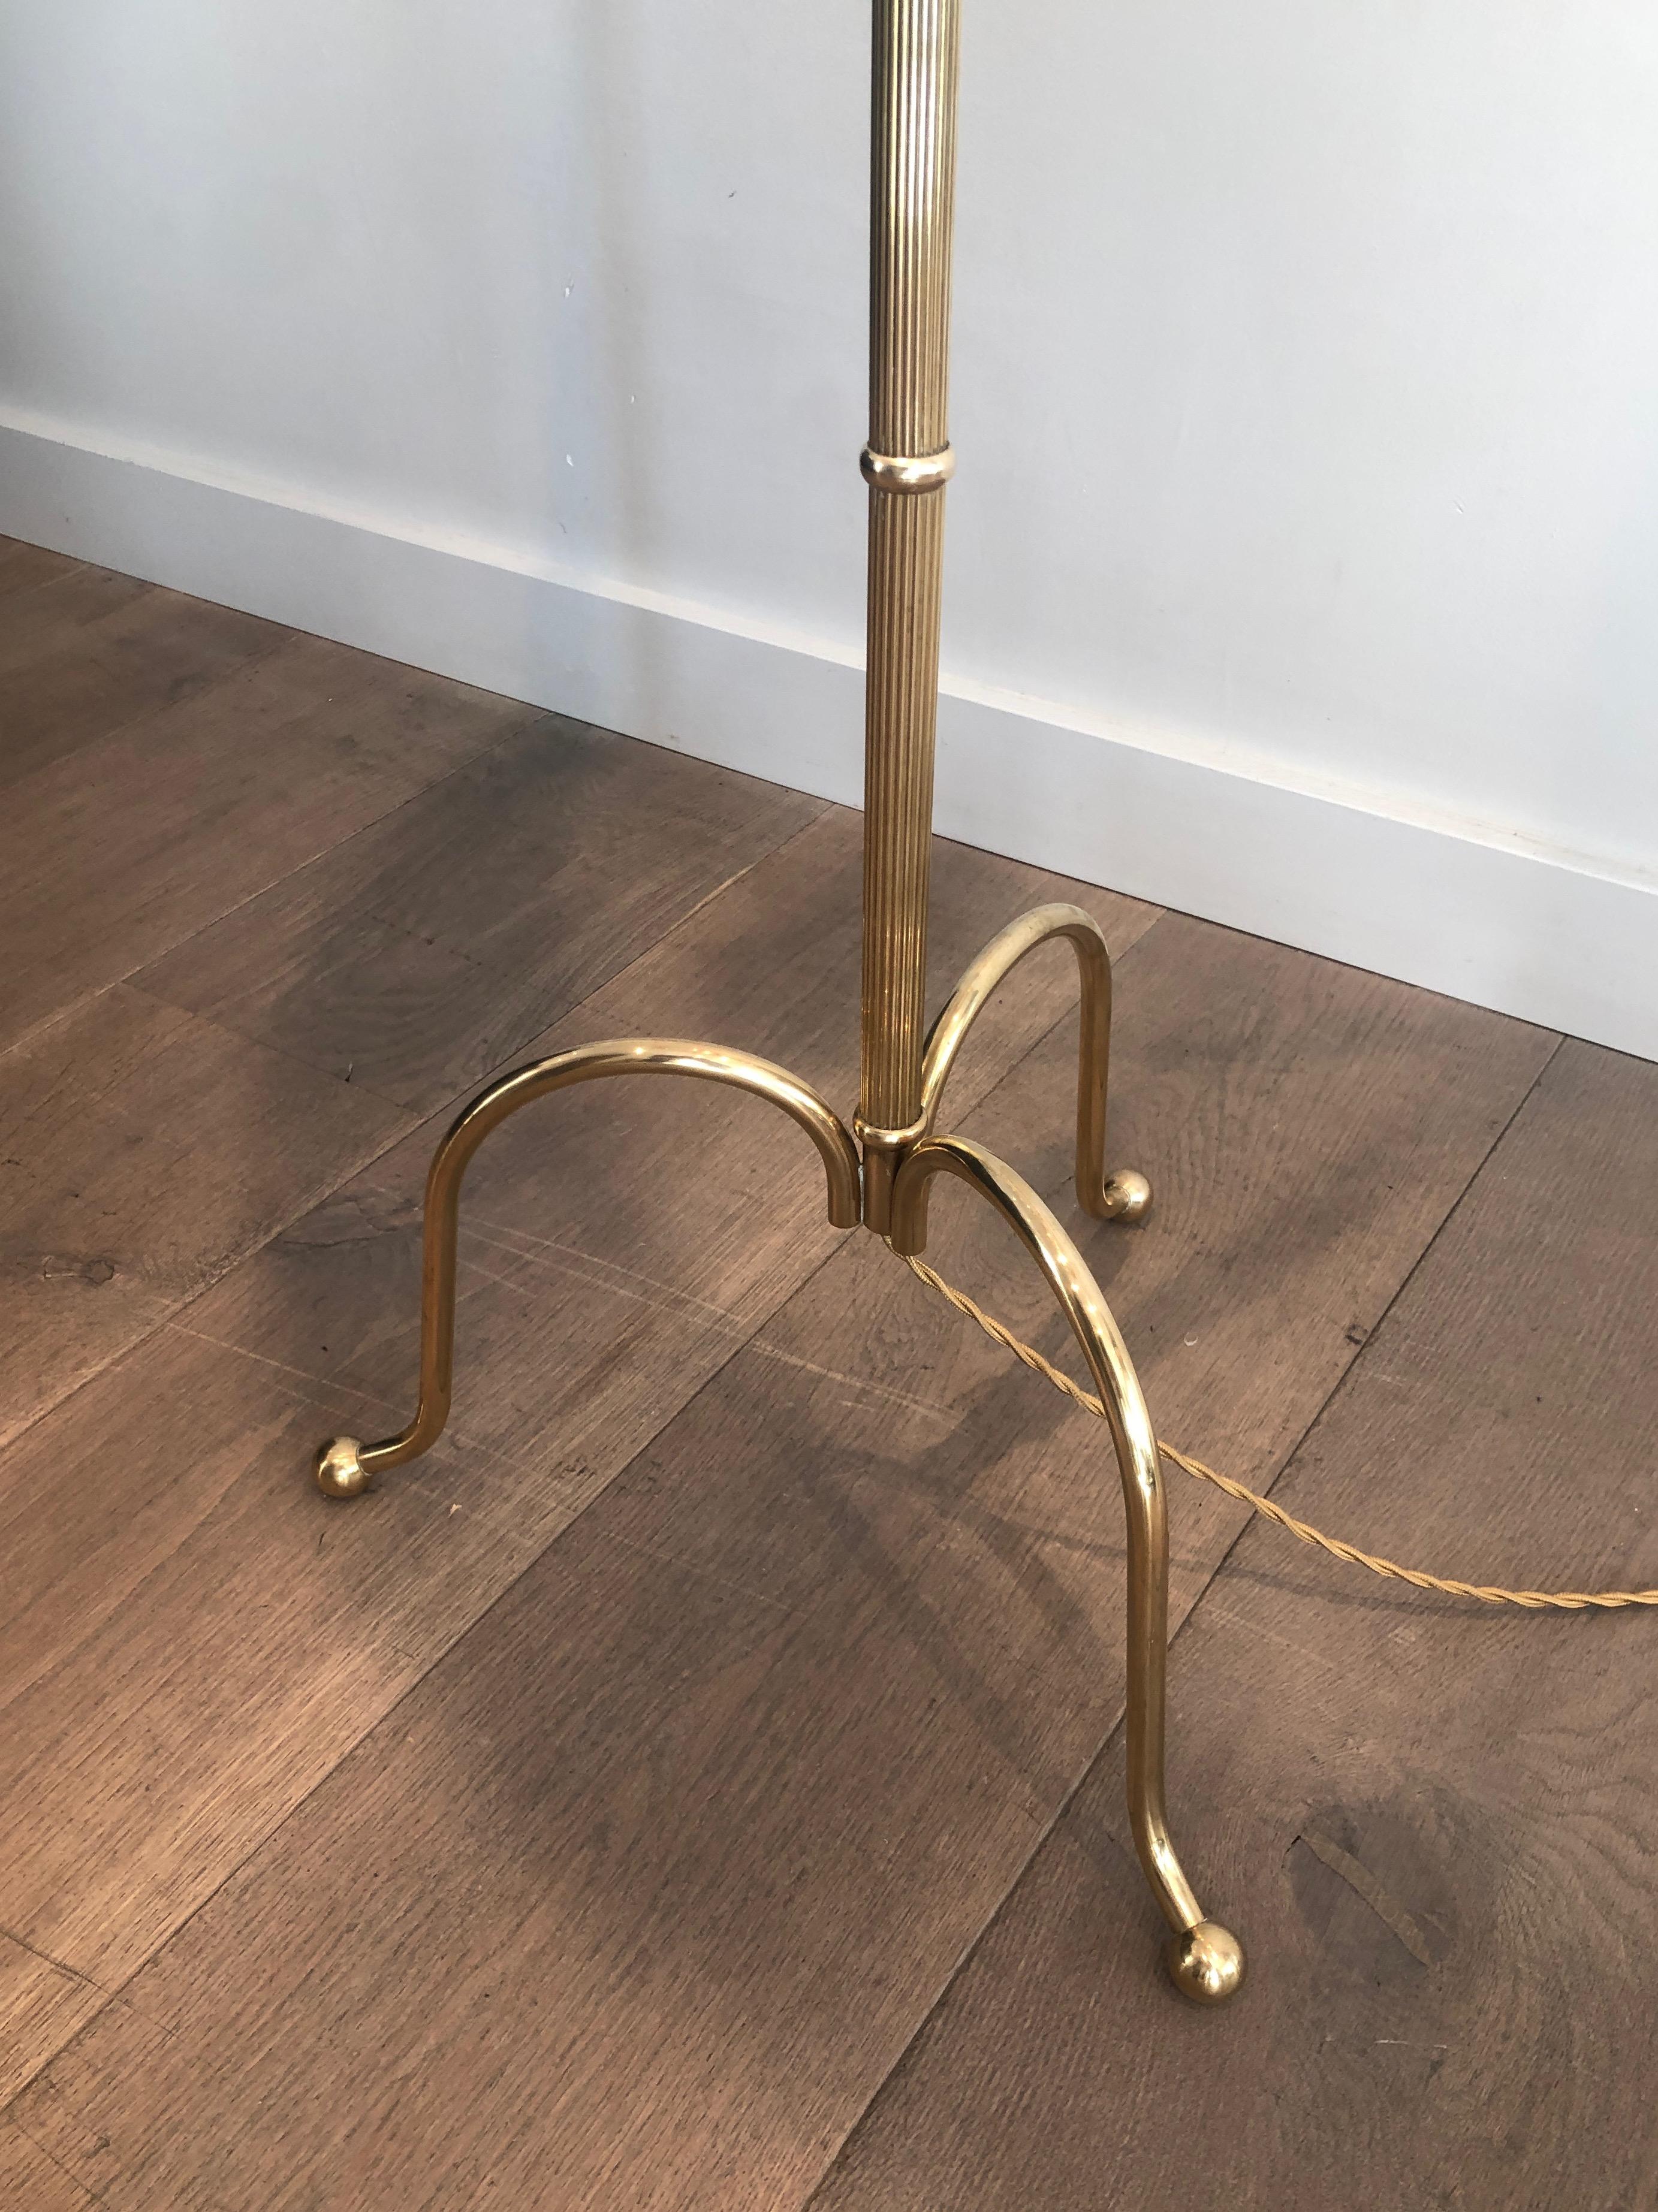 Tripode Brass Floor Lamp with 3 Arms, French Work by Maison Jansen For Sale 6